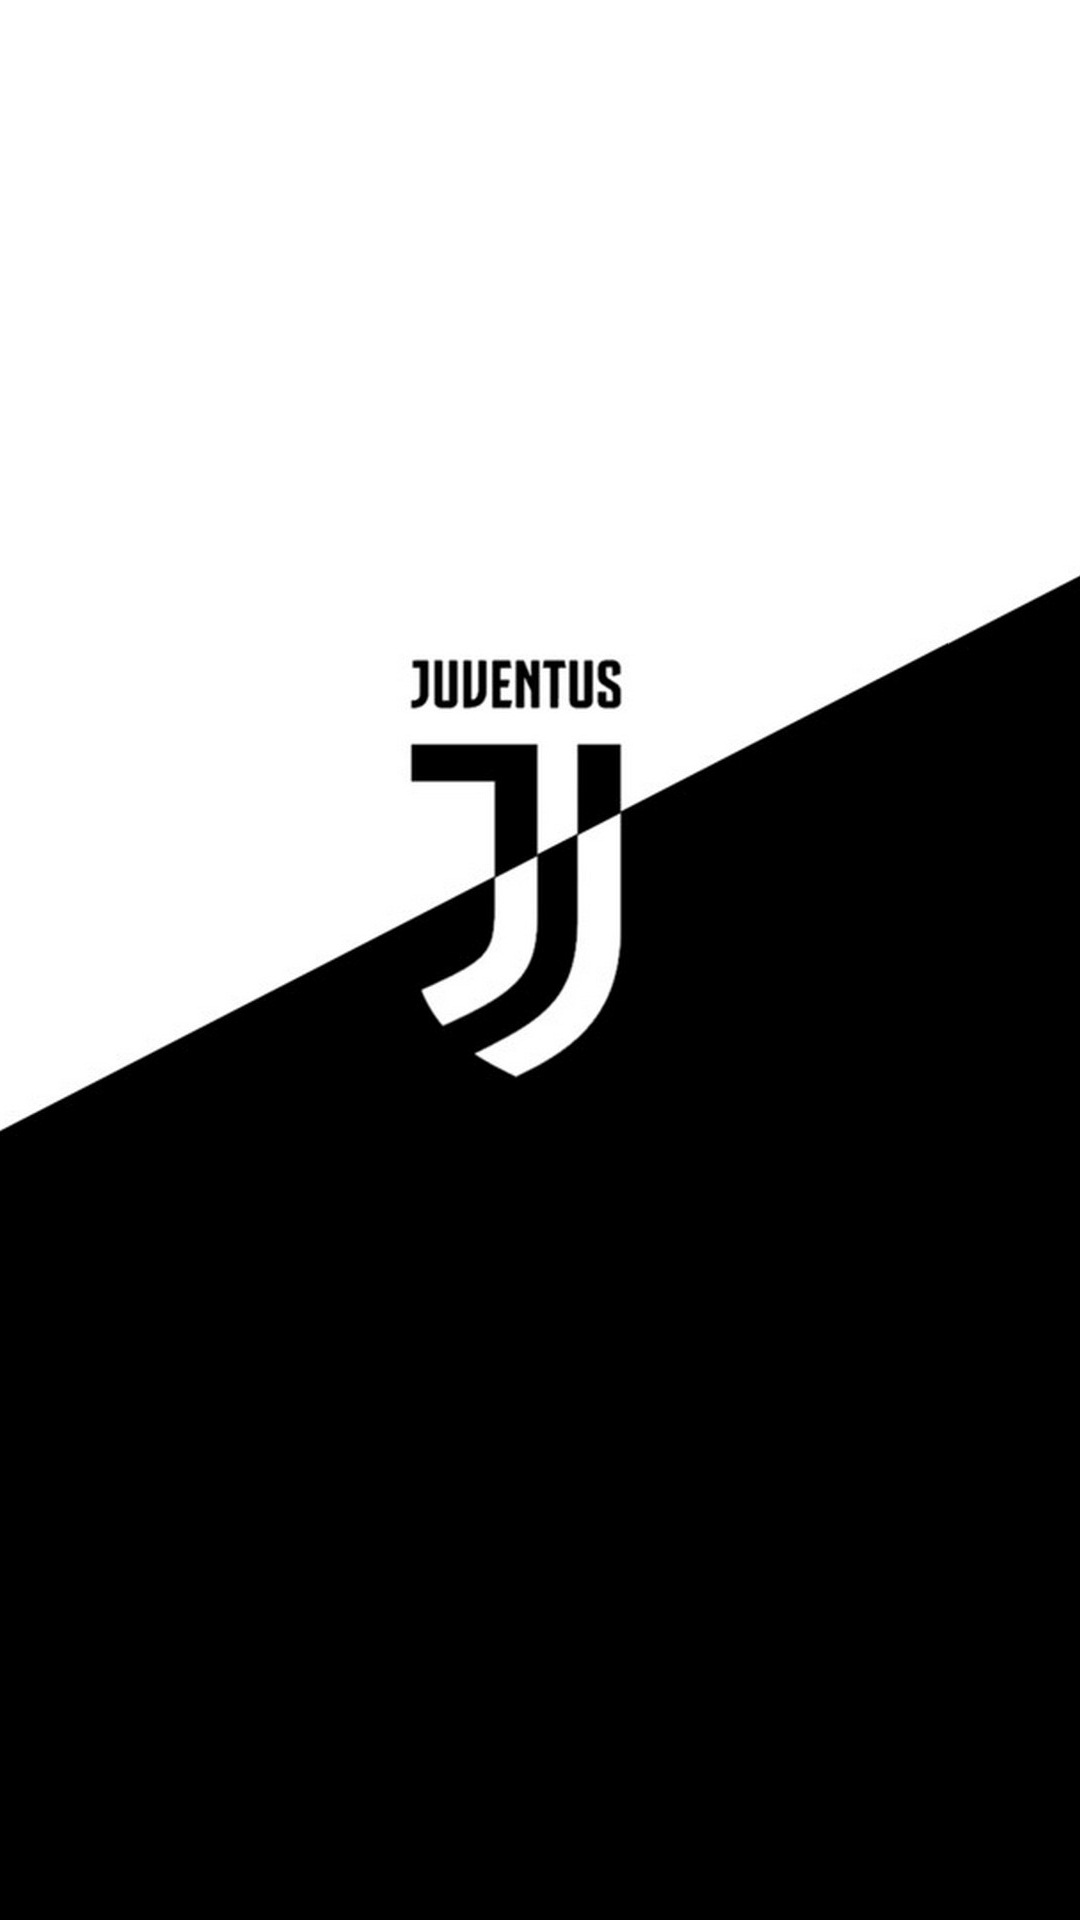 Juventus iPhone X Wallpaper With Resolution 1080X1920 pixel. You can make this wallpaper for your Mac or Windows Desktop Background, iPhone, Android or Tablet and another Smartphone device for free